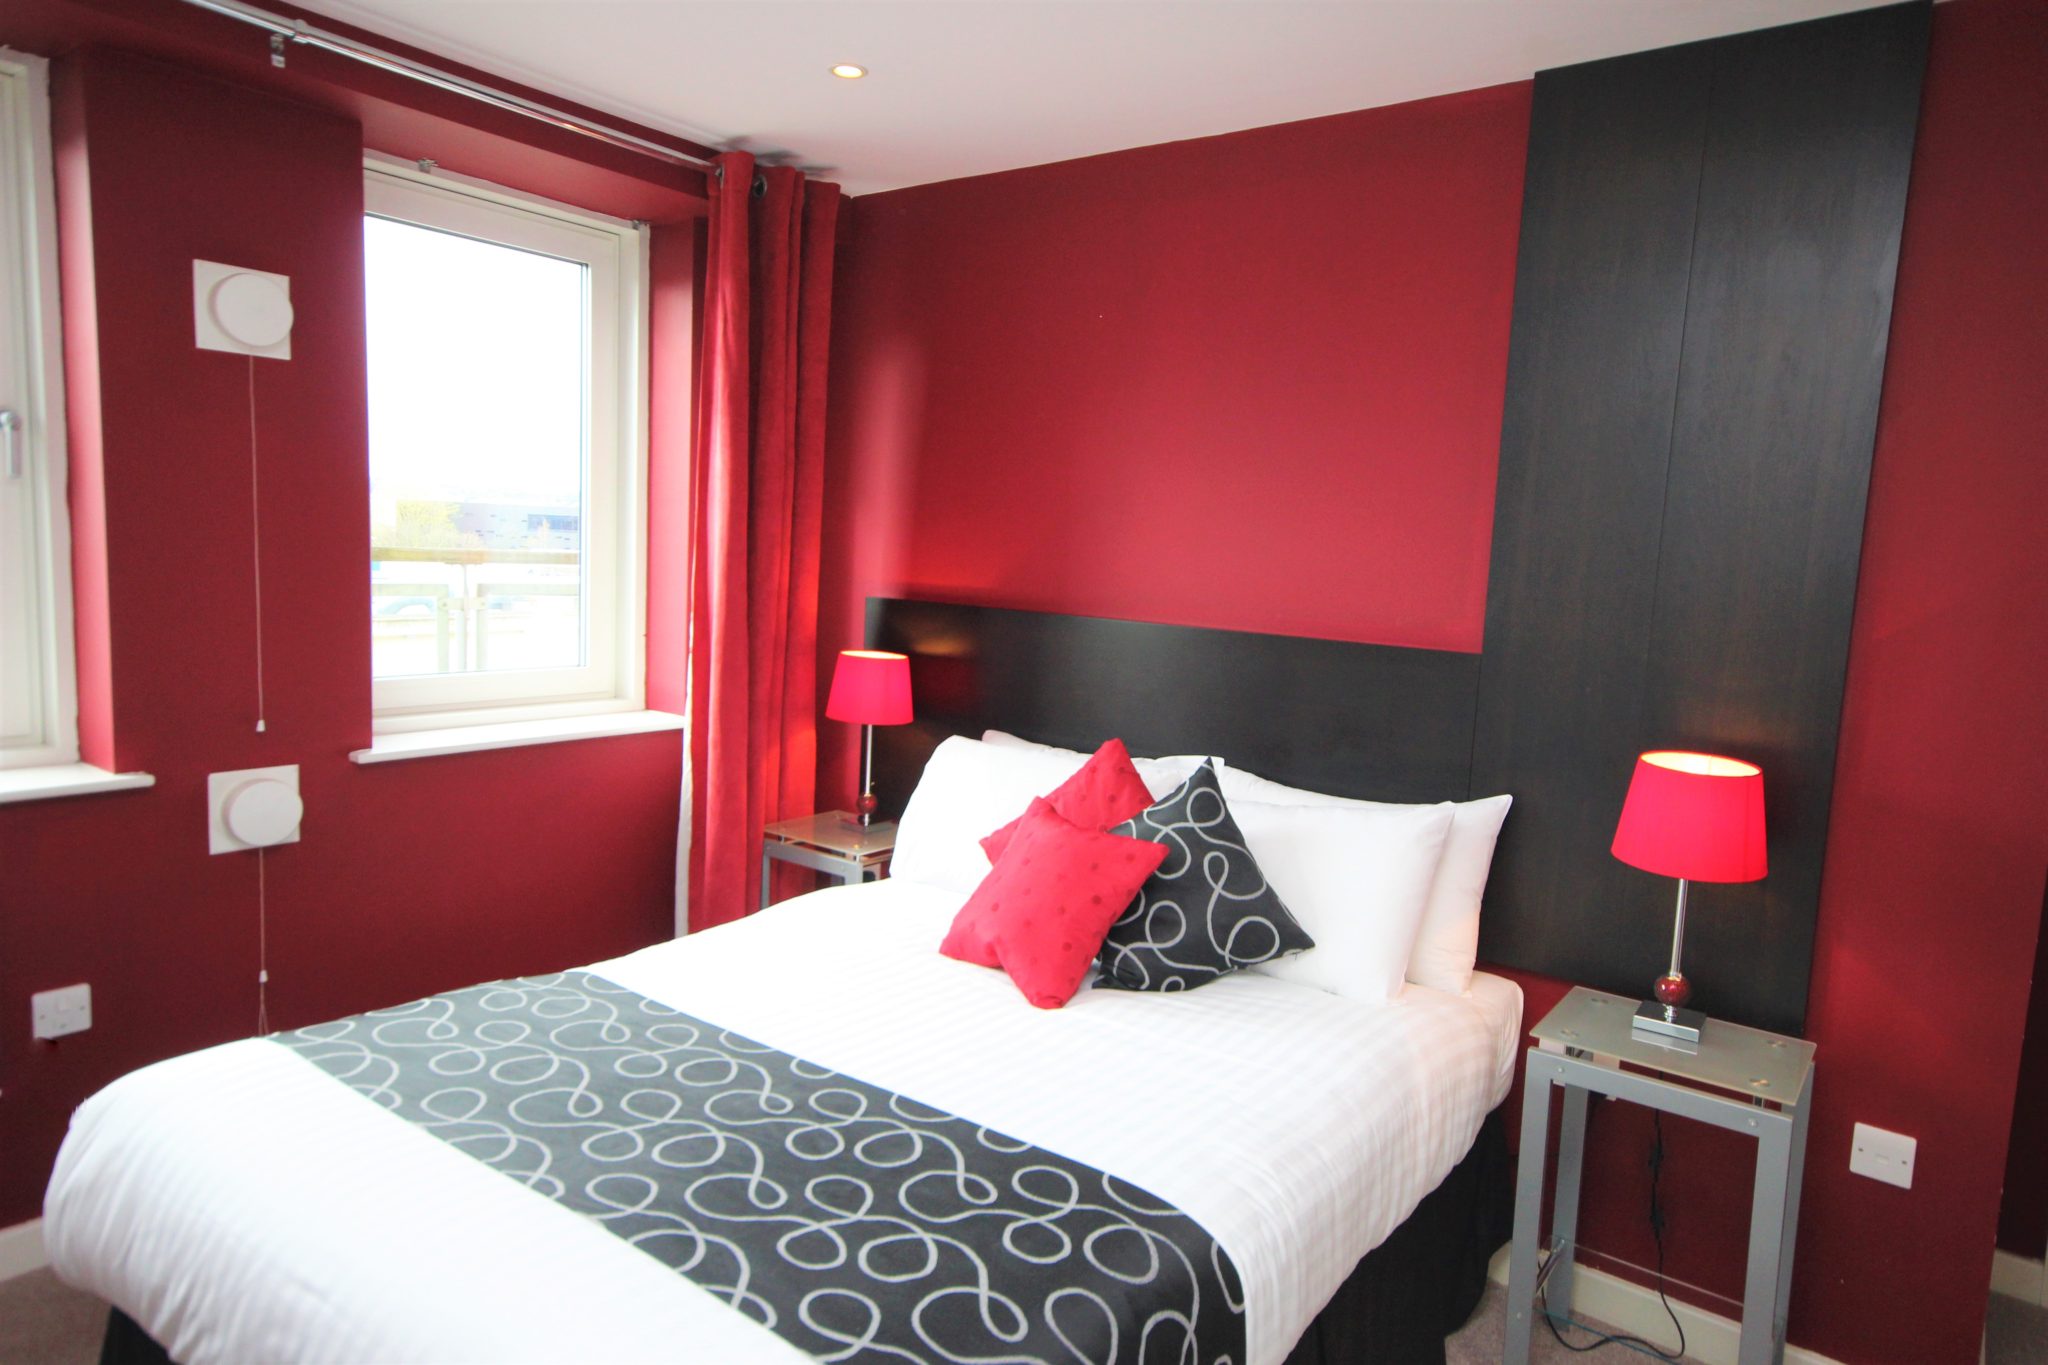 Newcastle-Corporate-Accommodation-UK-available-Now!-Book-Corporate-Serviced-Apartments-in-North-East-England-today!-Parking,Wifi,-5*-Service,-All-bills-incl-|-Urban-Stay